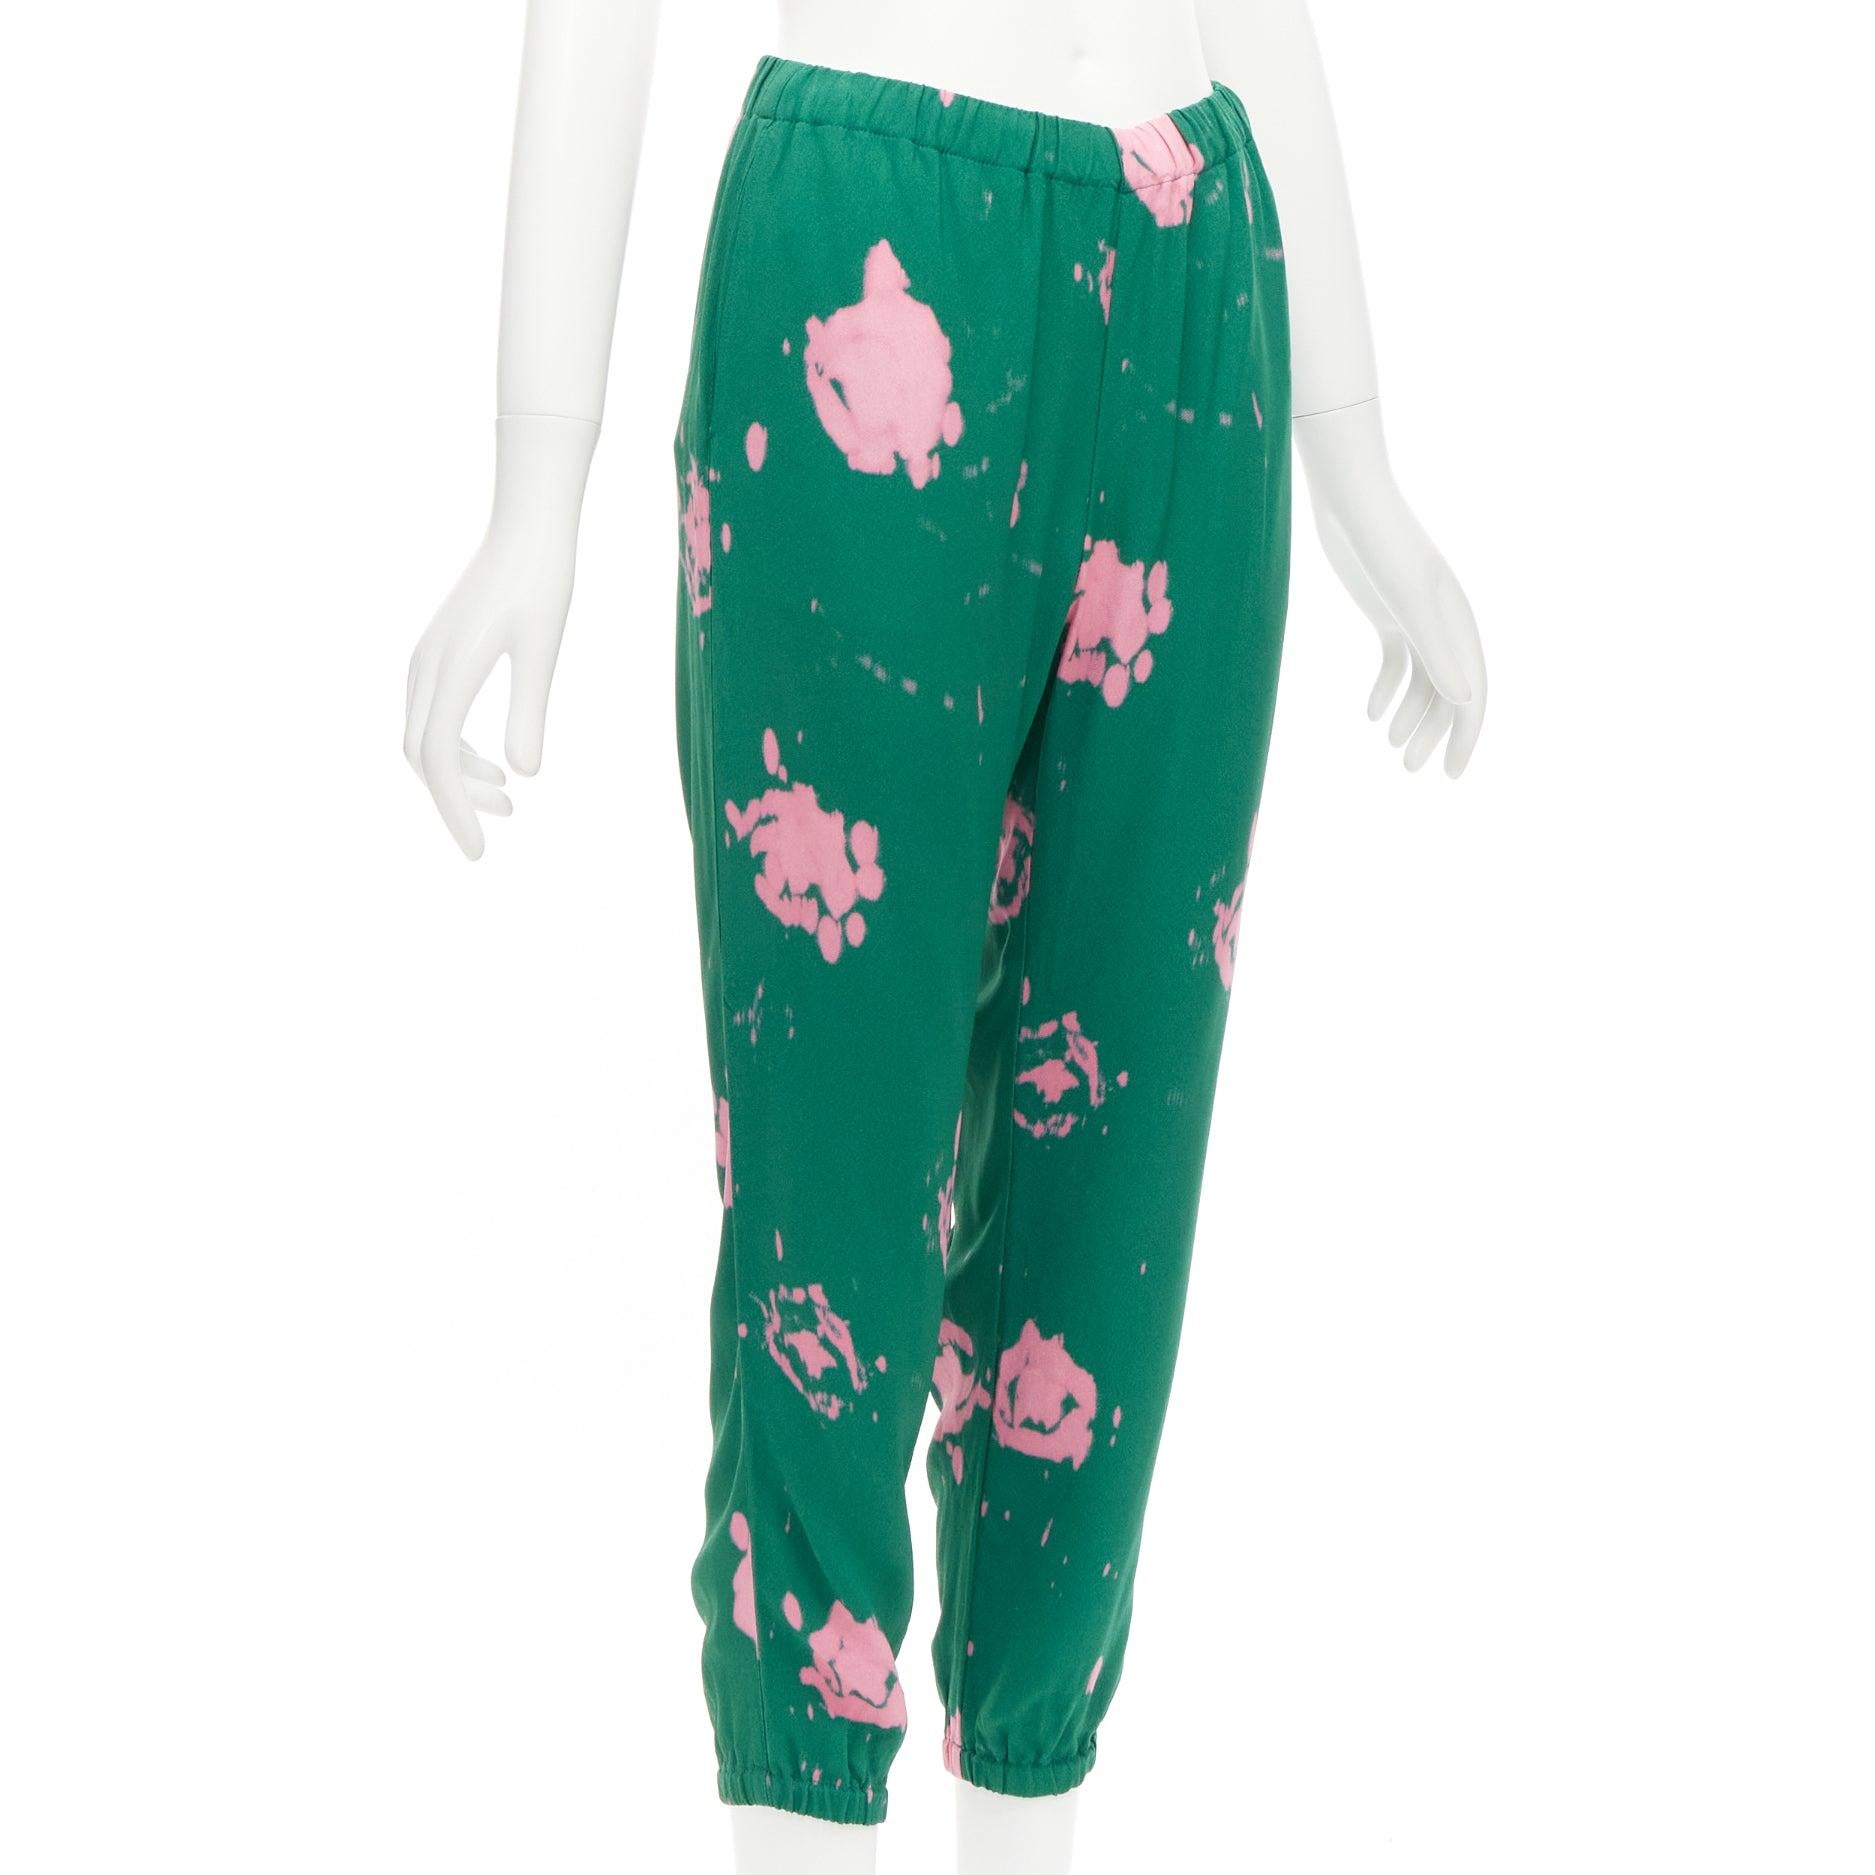 MARNI green pink splatter tie dye print elasticated casual pants IT38 XS
Reference: CELG/A00260
Brand: Marni
Material: Viscose
Color: Green, Pink
Pattern: Abstract
Closure: Elasticated
Made in: Italy

CONDITION:
Condition: Excellent, this item was